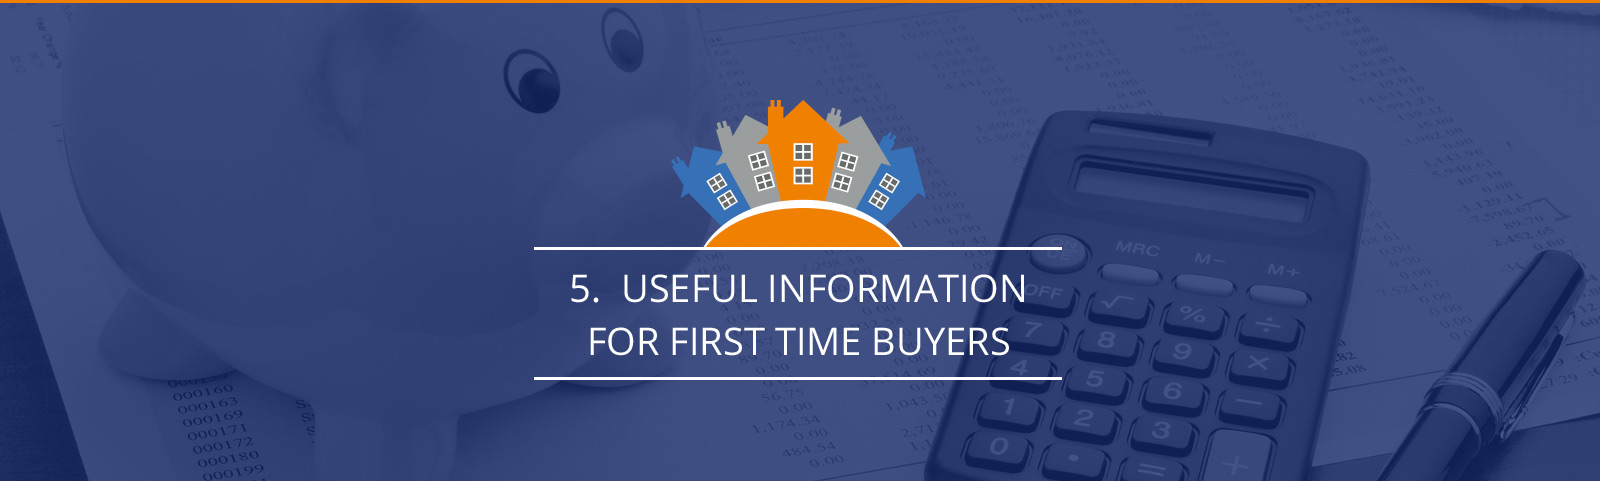 Useful Information for first time buyers